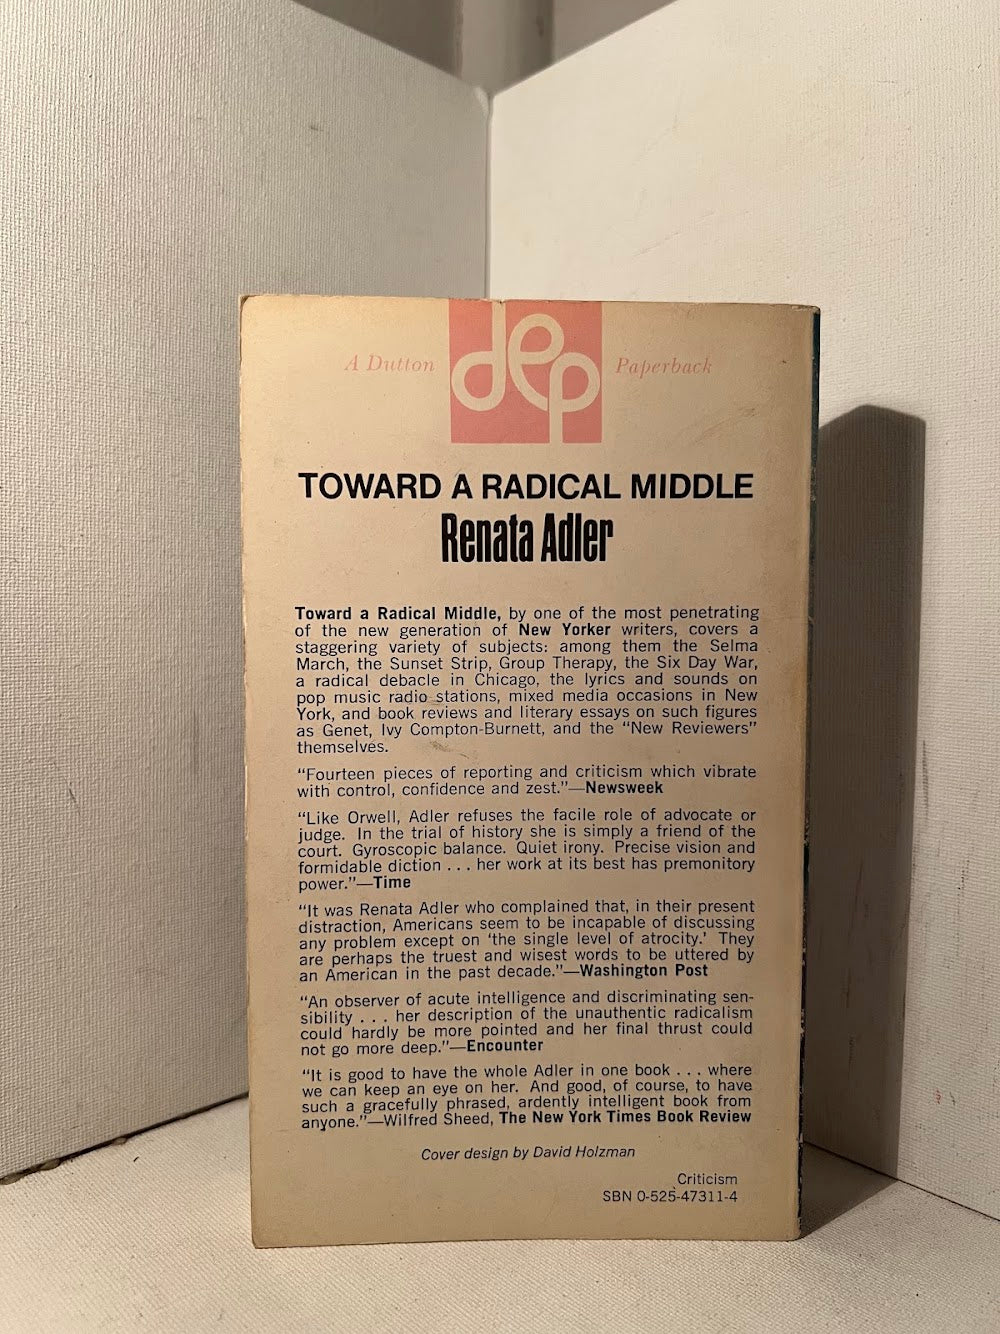 Toward a Radical Middle by Renata Adler